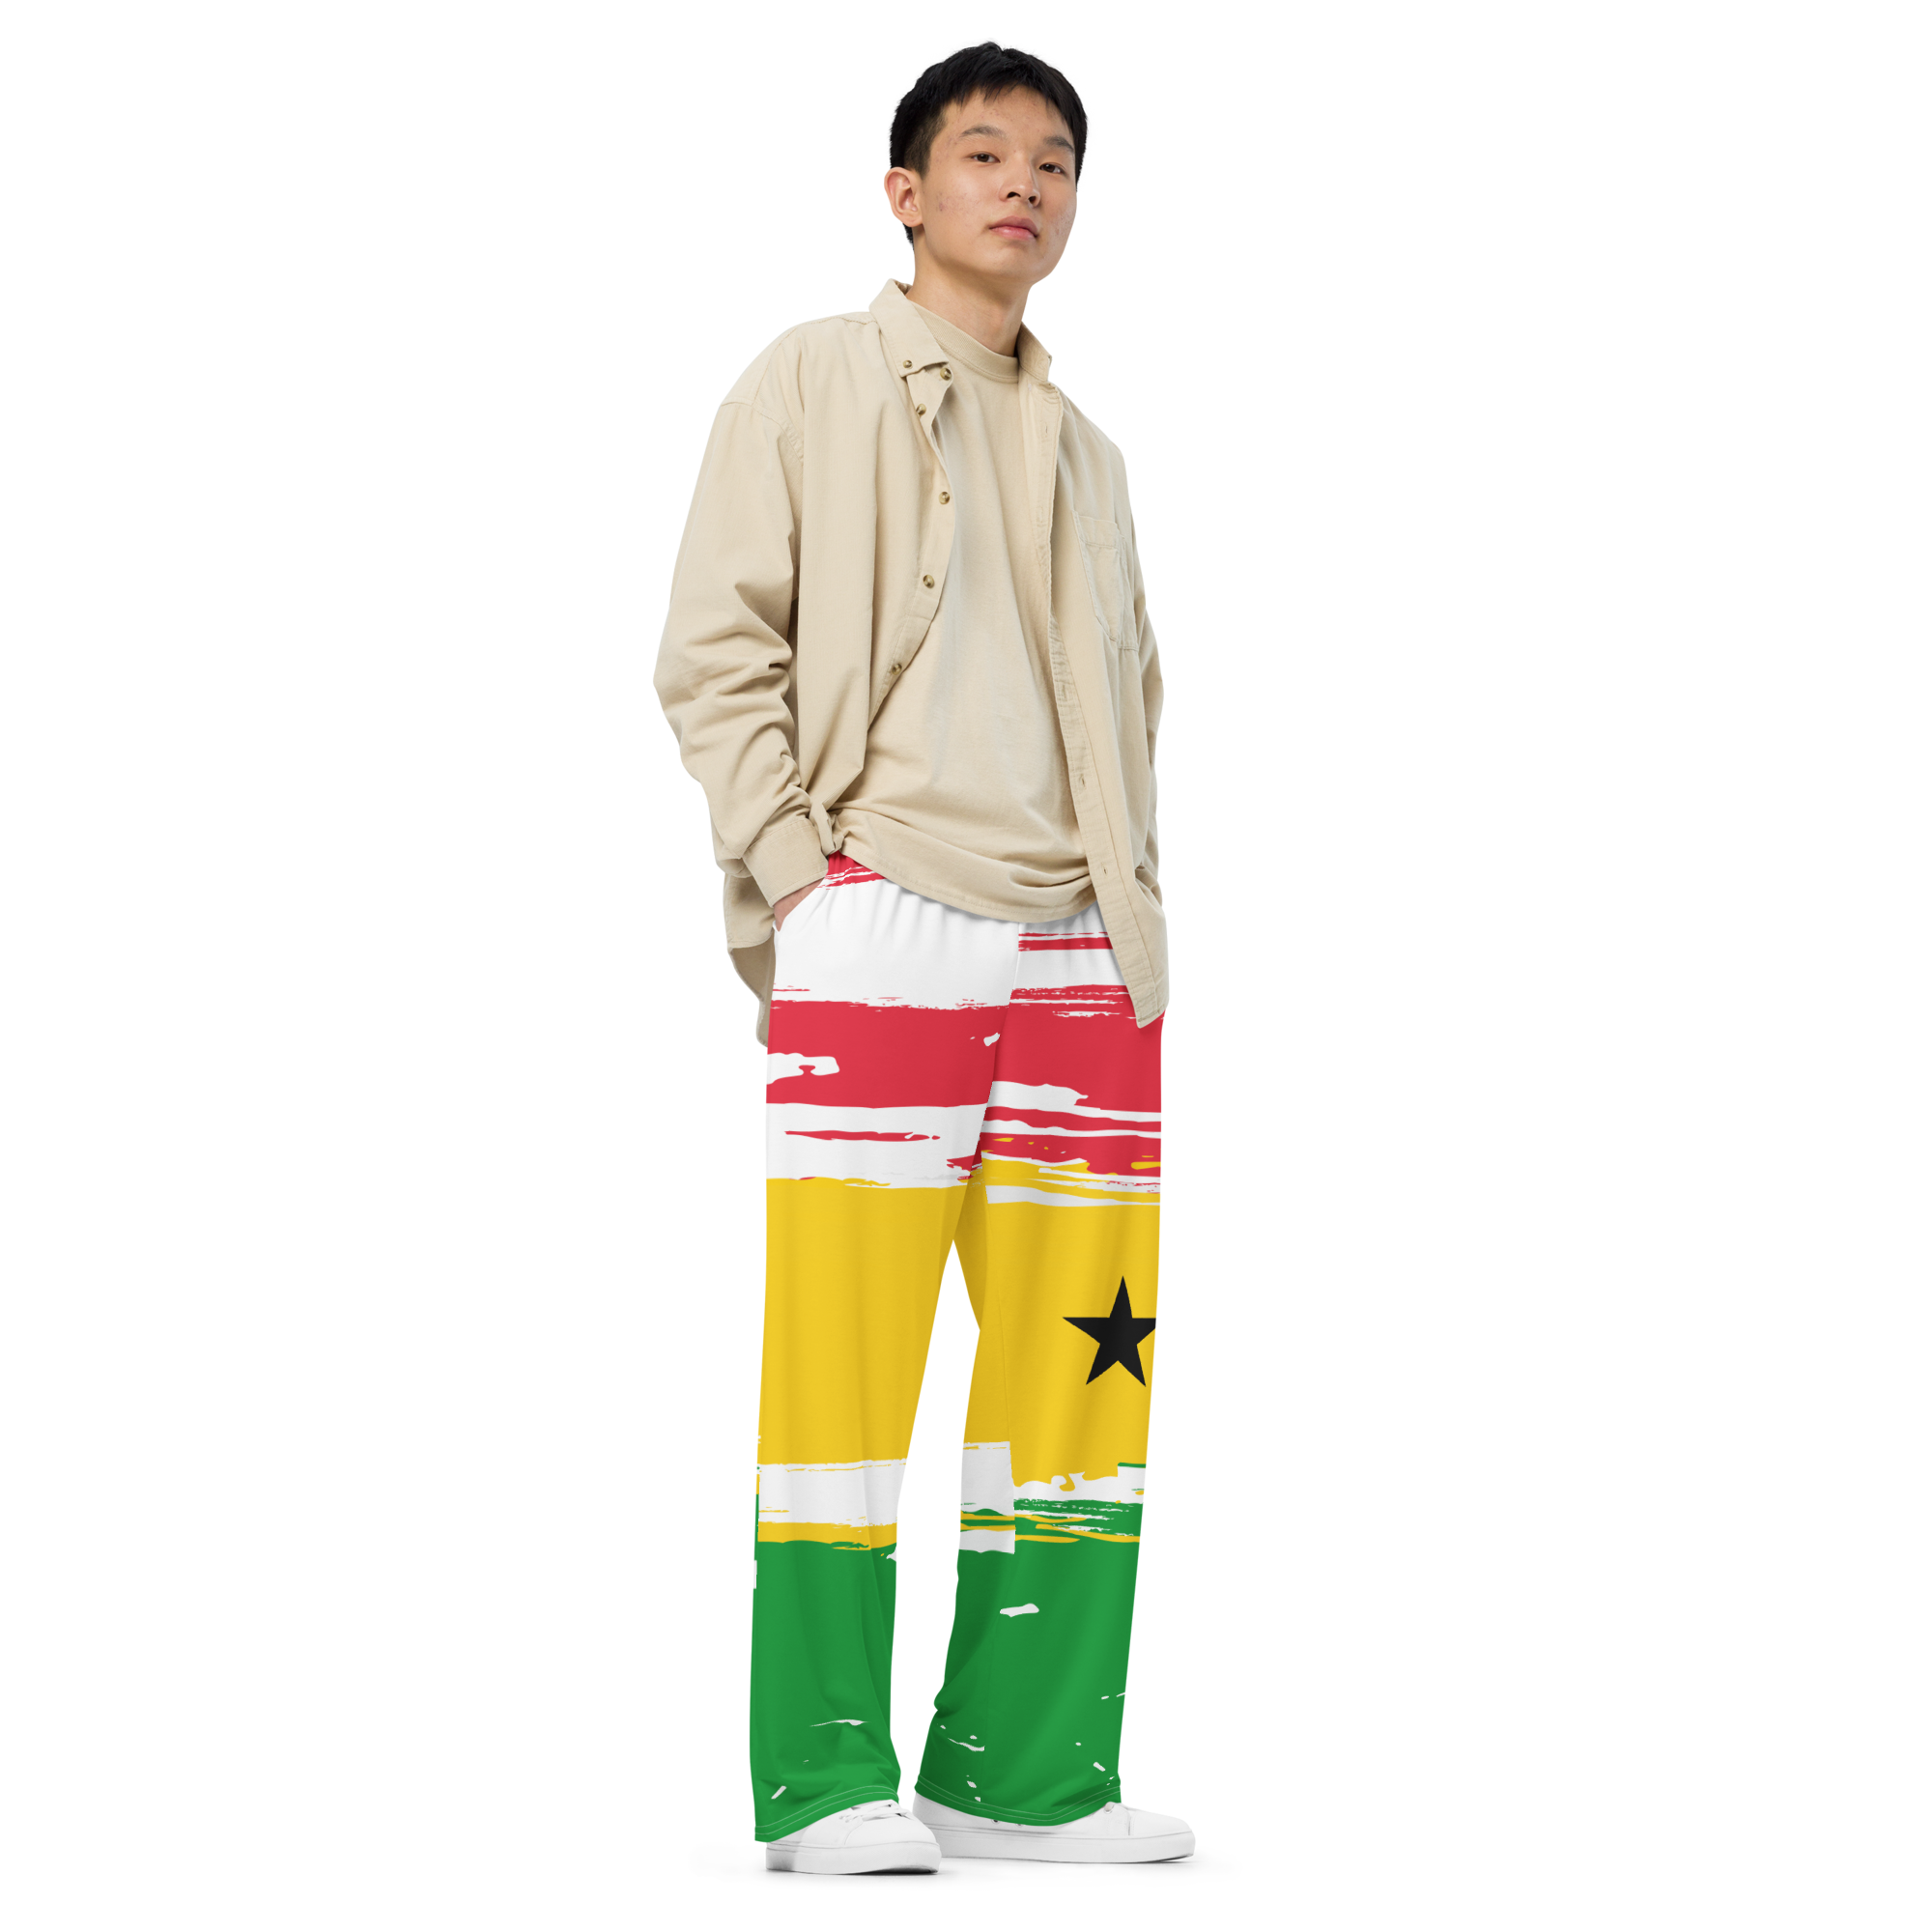 New 2023 arrivals! My colorful Ghana flag inspired unisex wide leg workout pants by Volleybragswag are the cutest workout clothes for volleyball players now sold on ETSY!